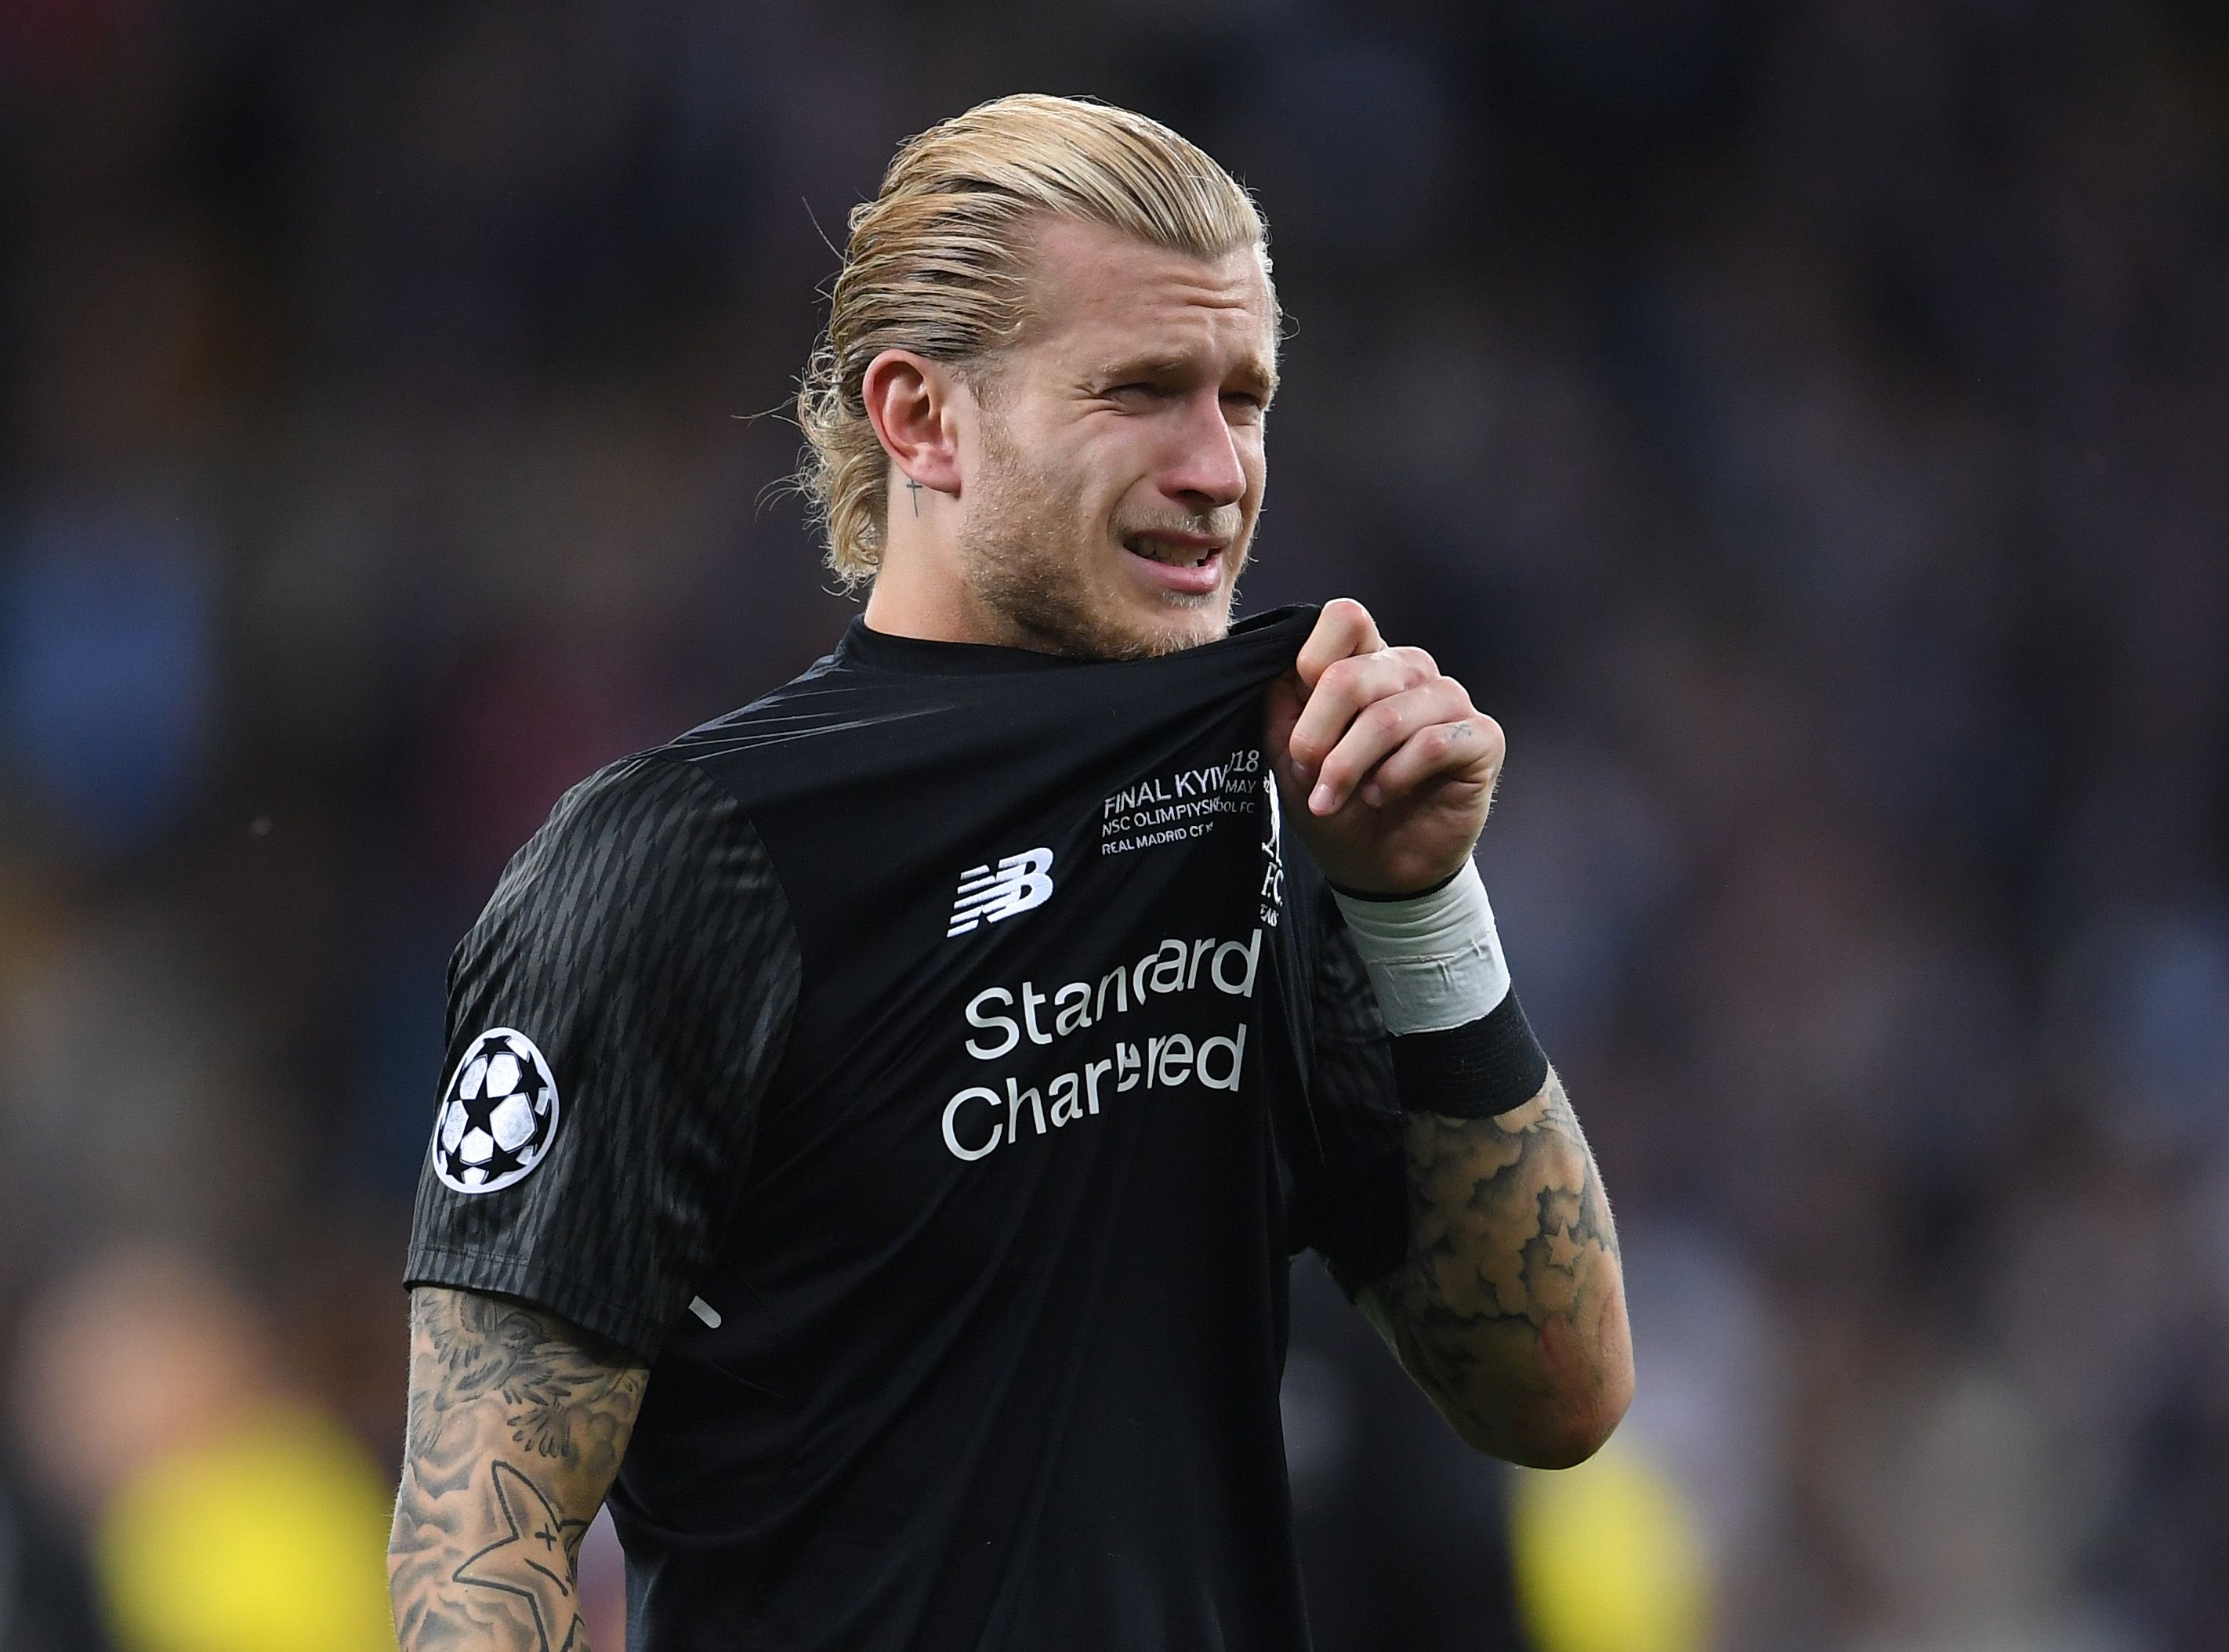 The moment Liverpool players gave up on Loris Karius has ...